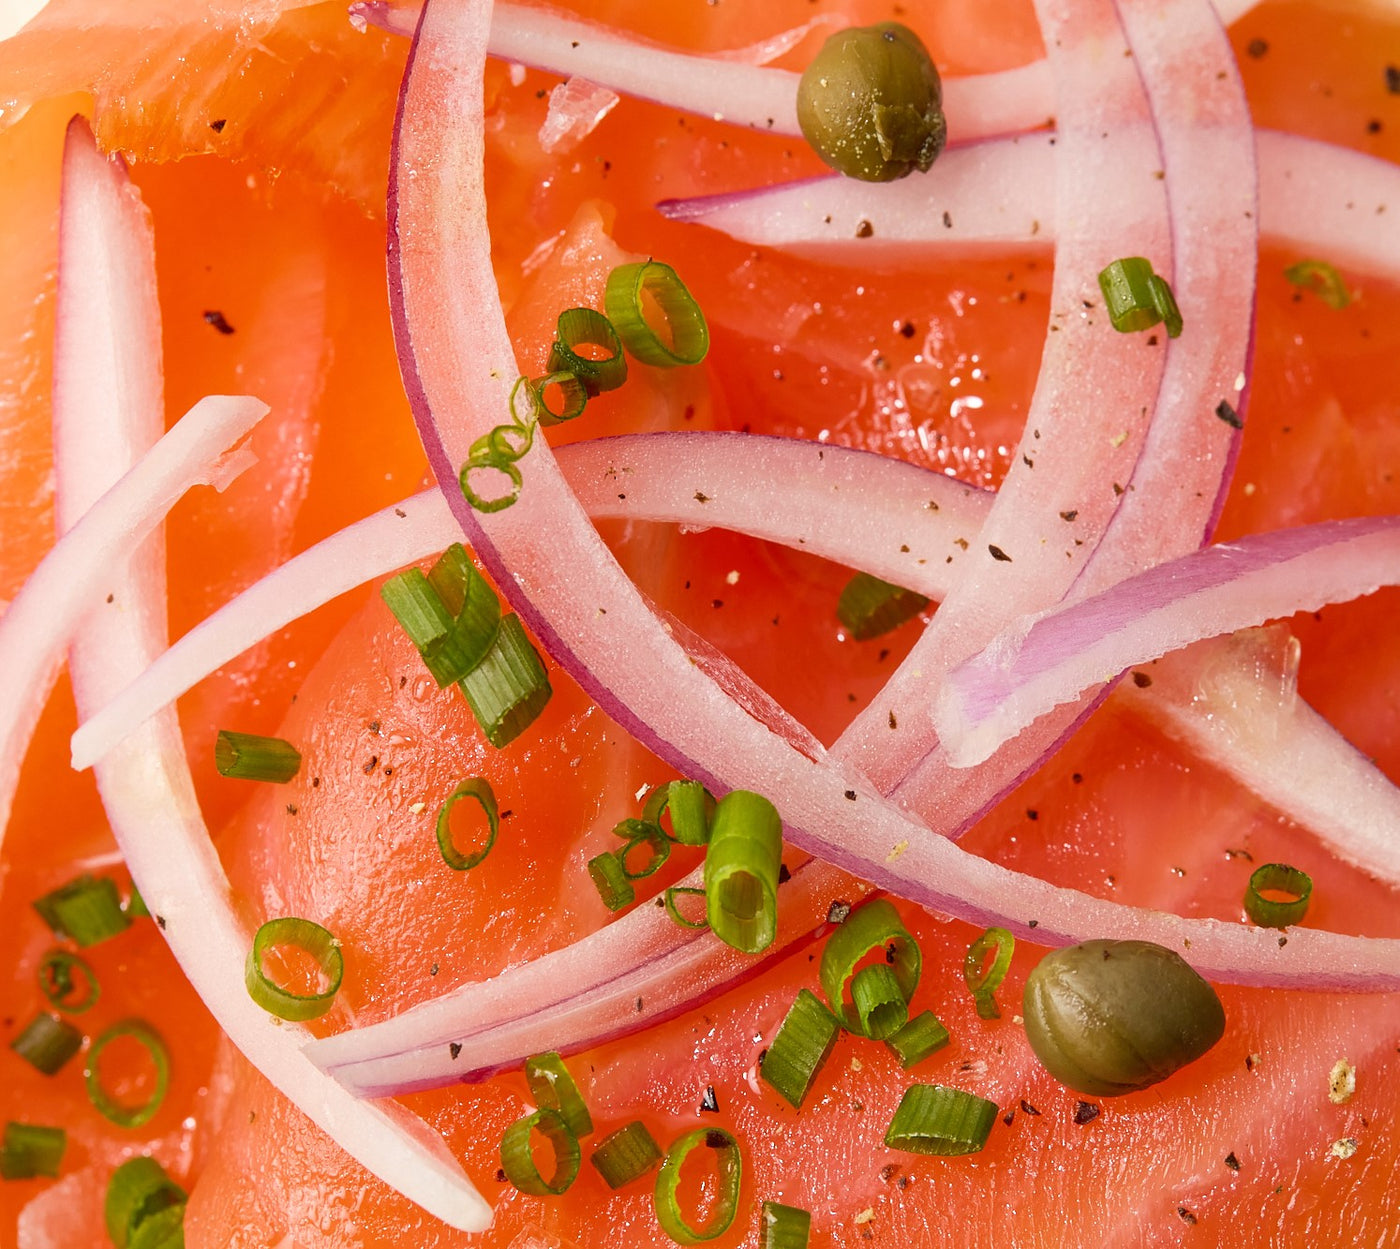 Cold-Smoked "Lox" Fillet